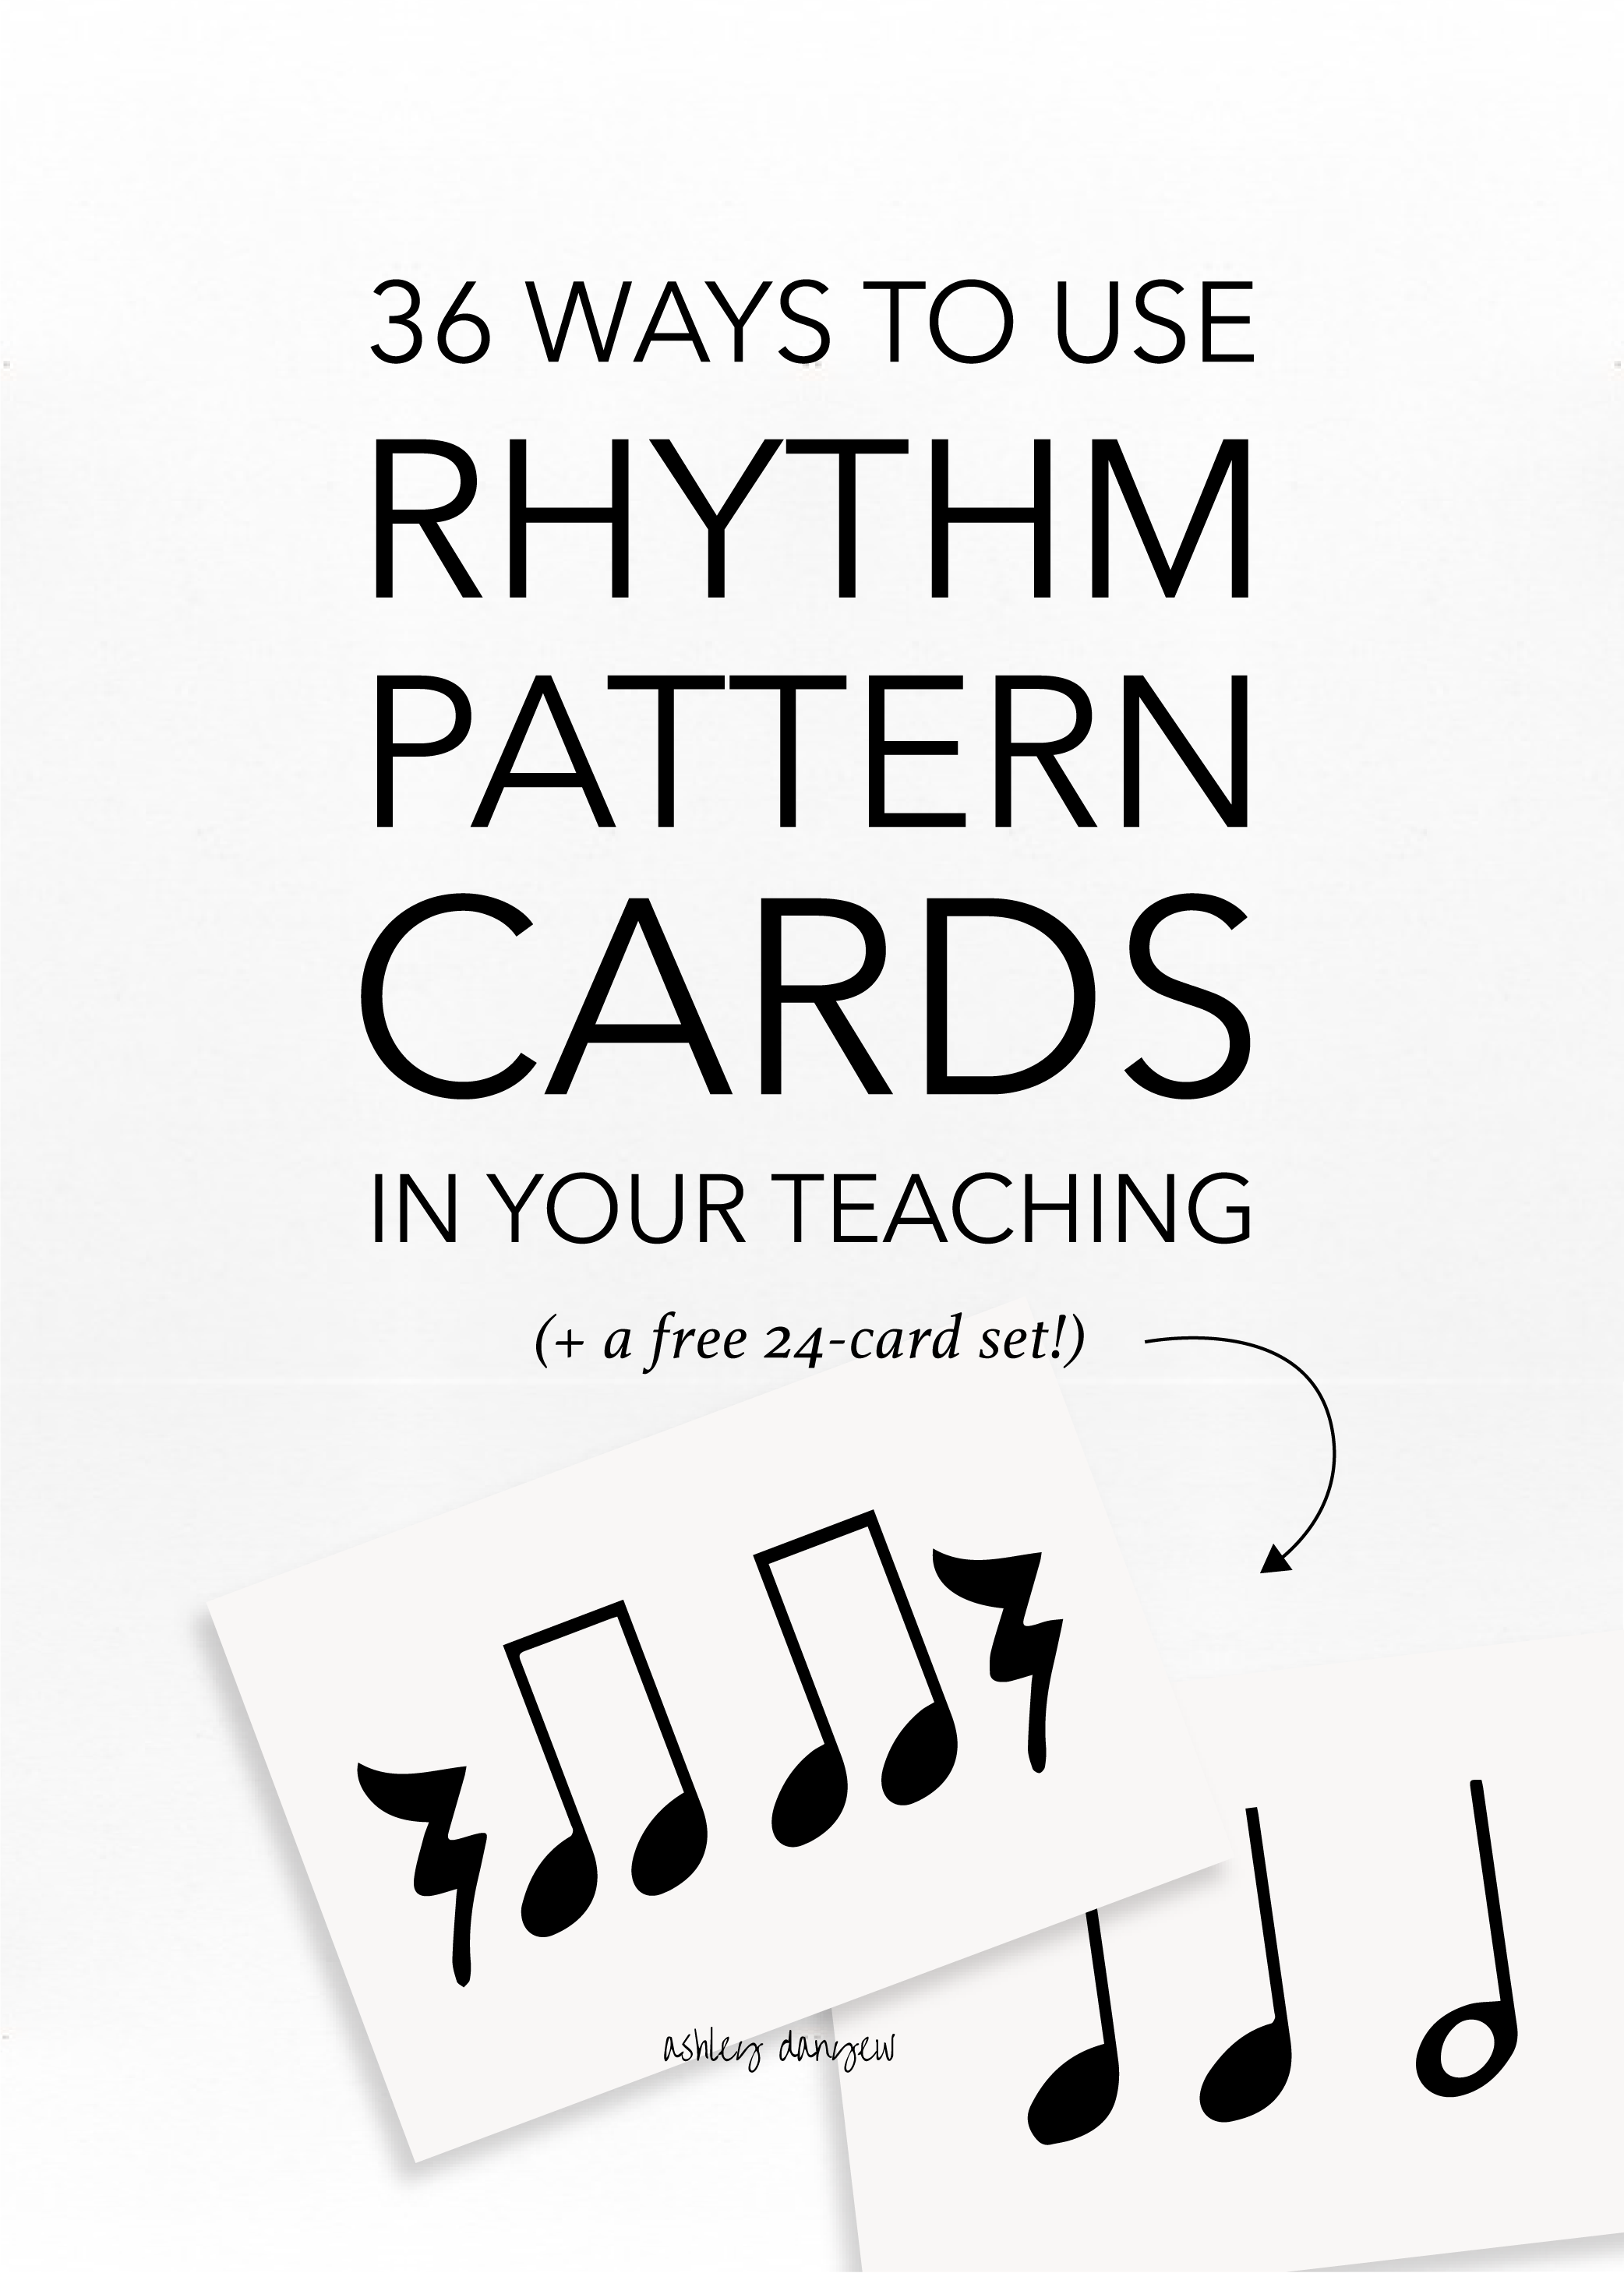 Copy of 36 Ways to Use Rhythm Pattern Cards In Your Teaching